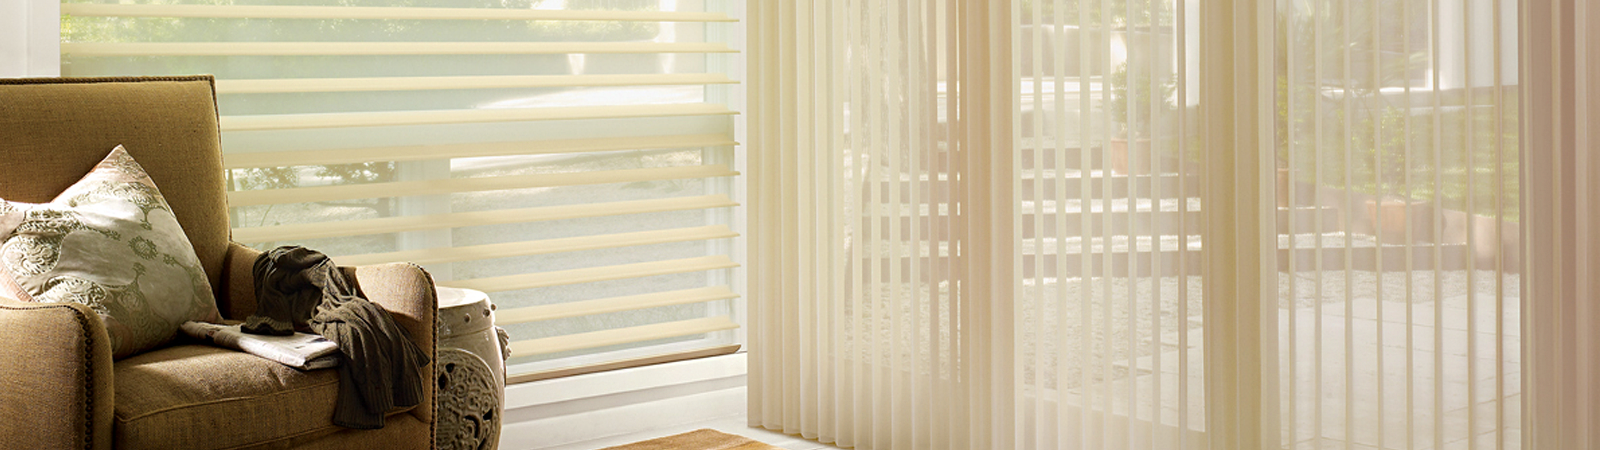 Sheers Premium Vertical Window Blinds, What Are The Best Shades For Privacy